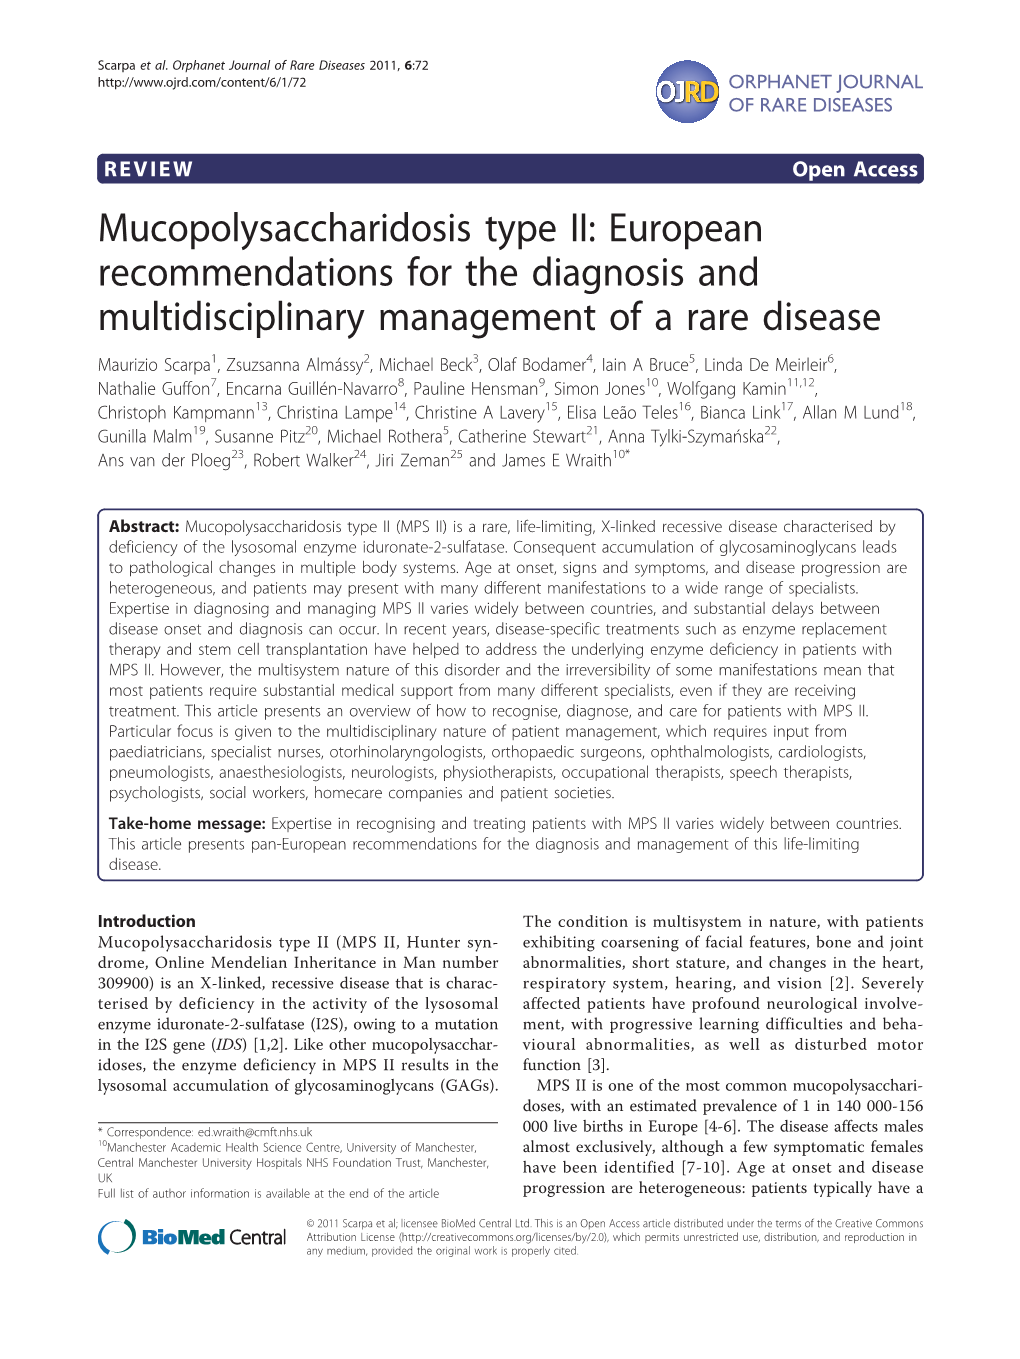 Mucopolysaccharidosis Type II: European Recommendations for The